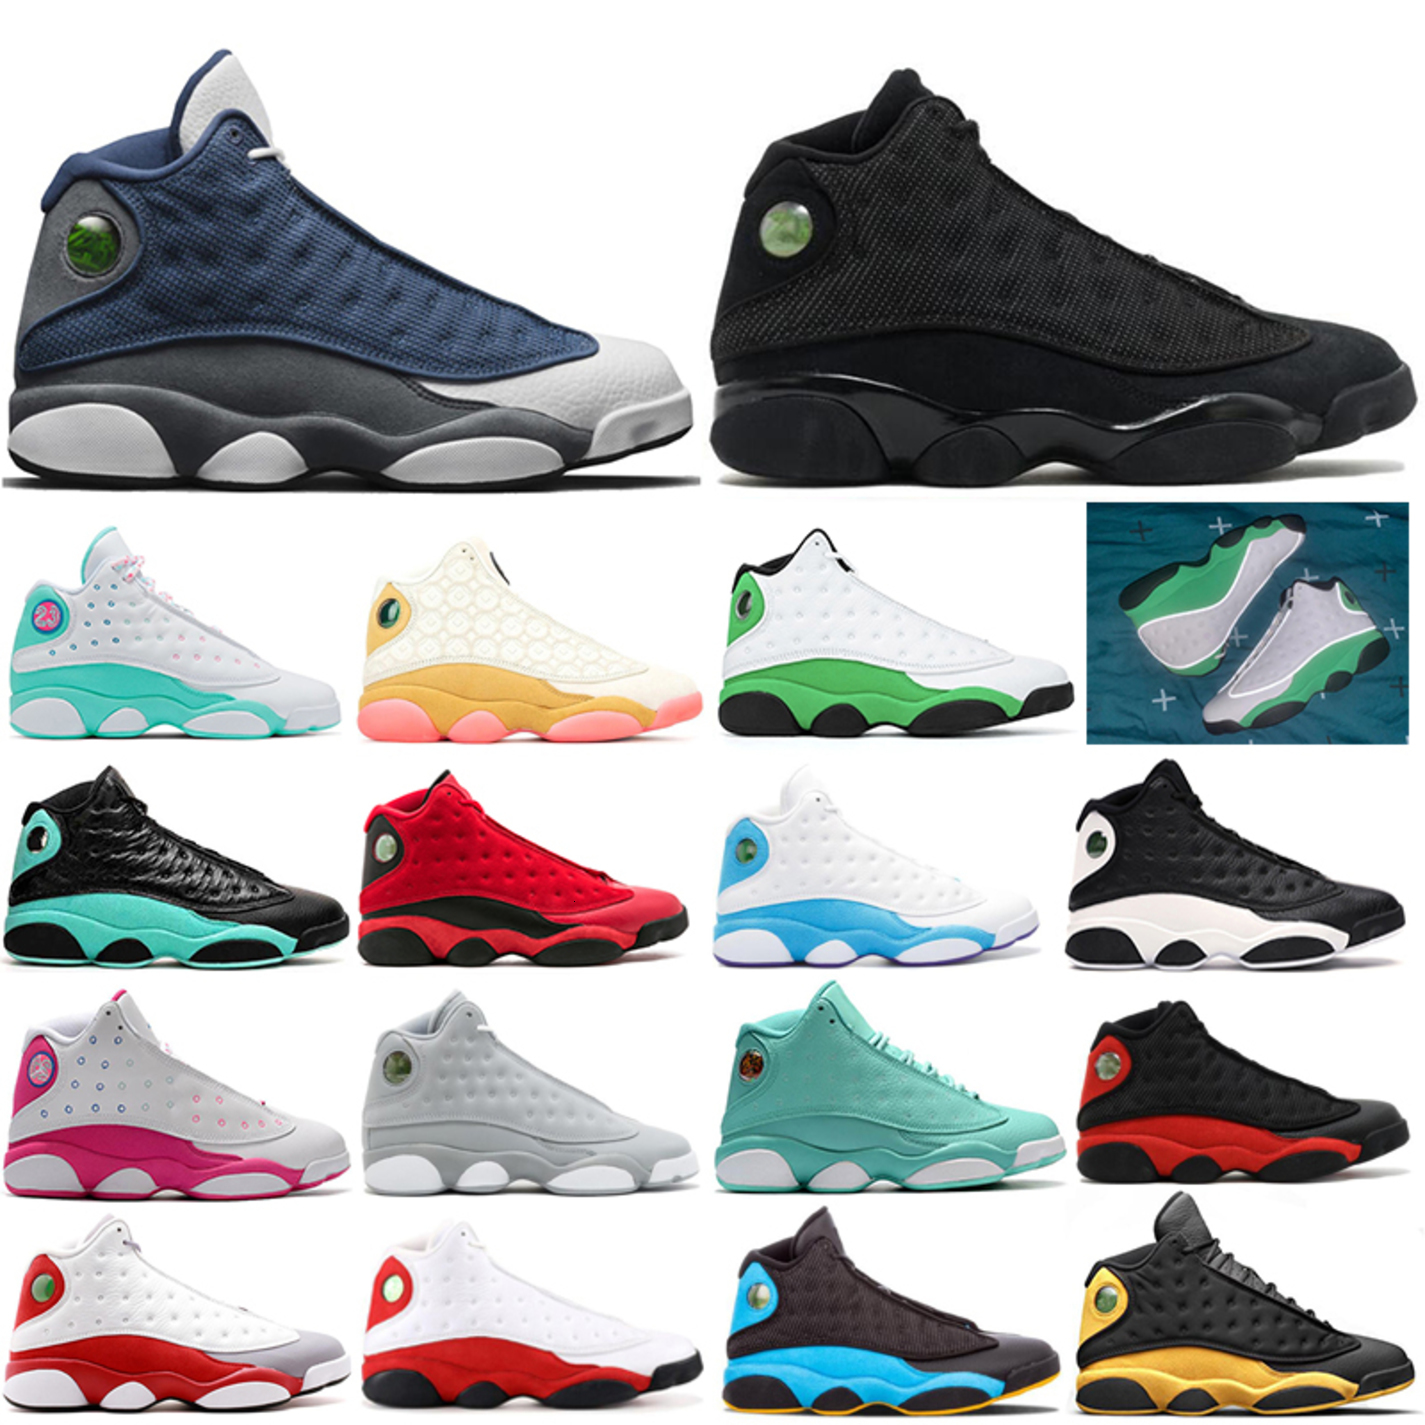 

13 13s Mens Basketball Shoes Aurora Green black cat Flint chicago Playground Reverse He Got Game Men shoes Sneaker Trainers 5.5-13, Box fees etc